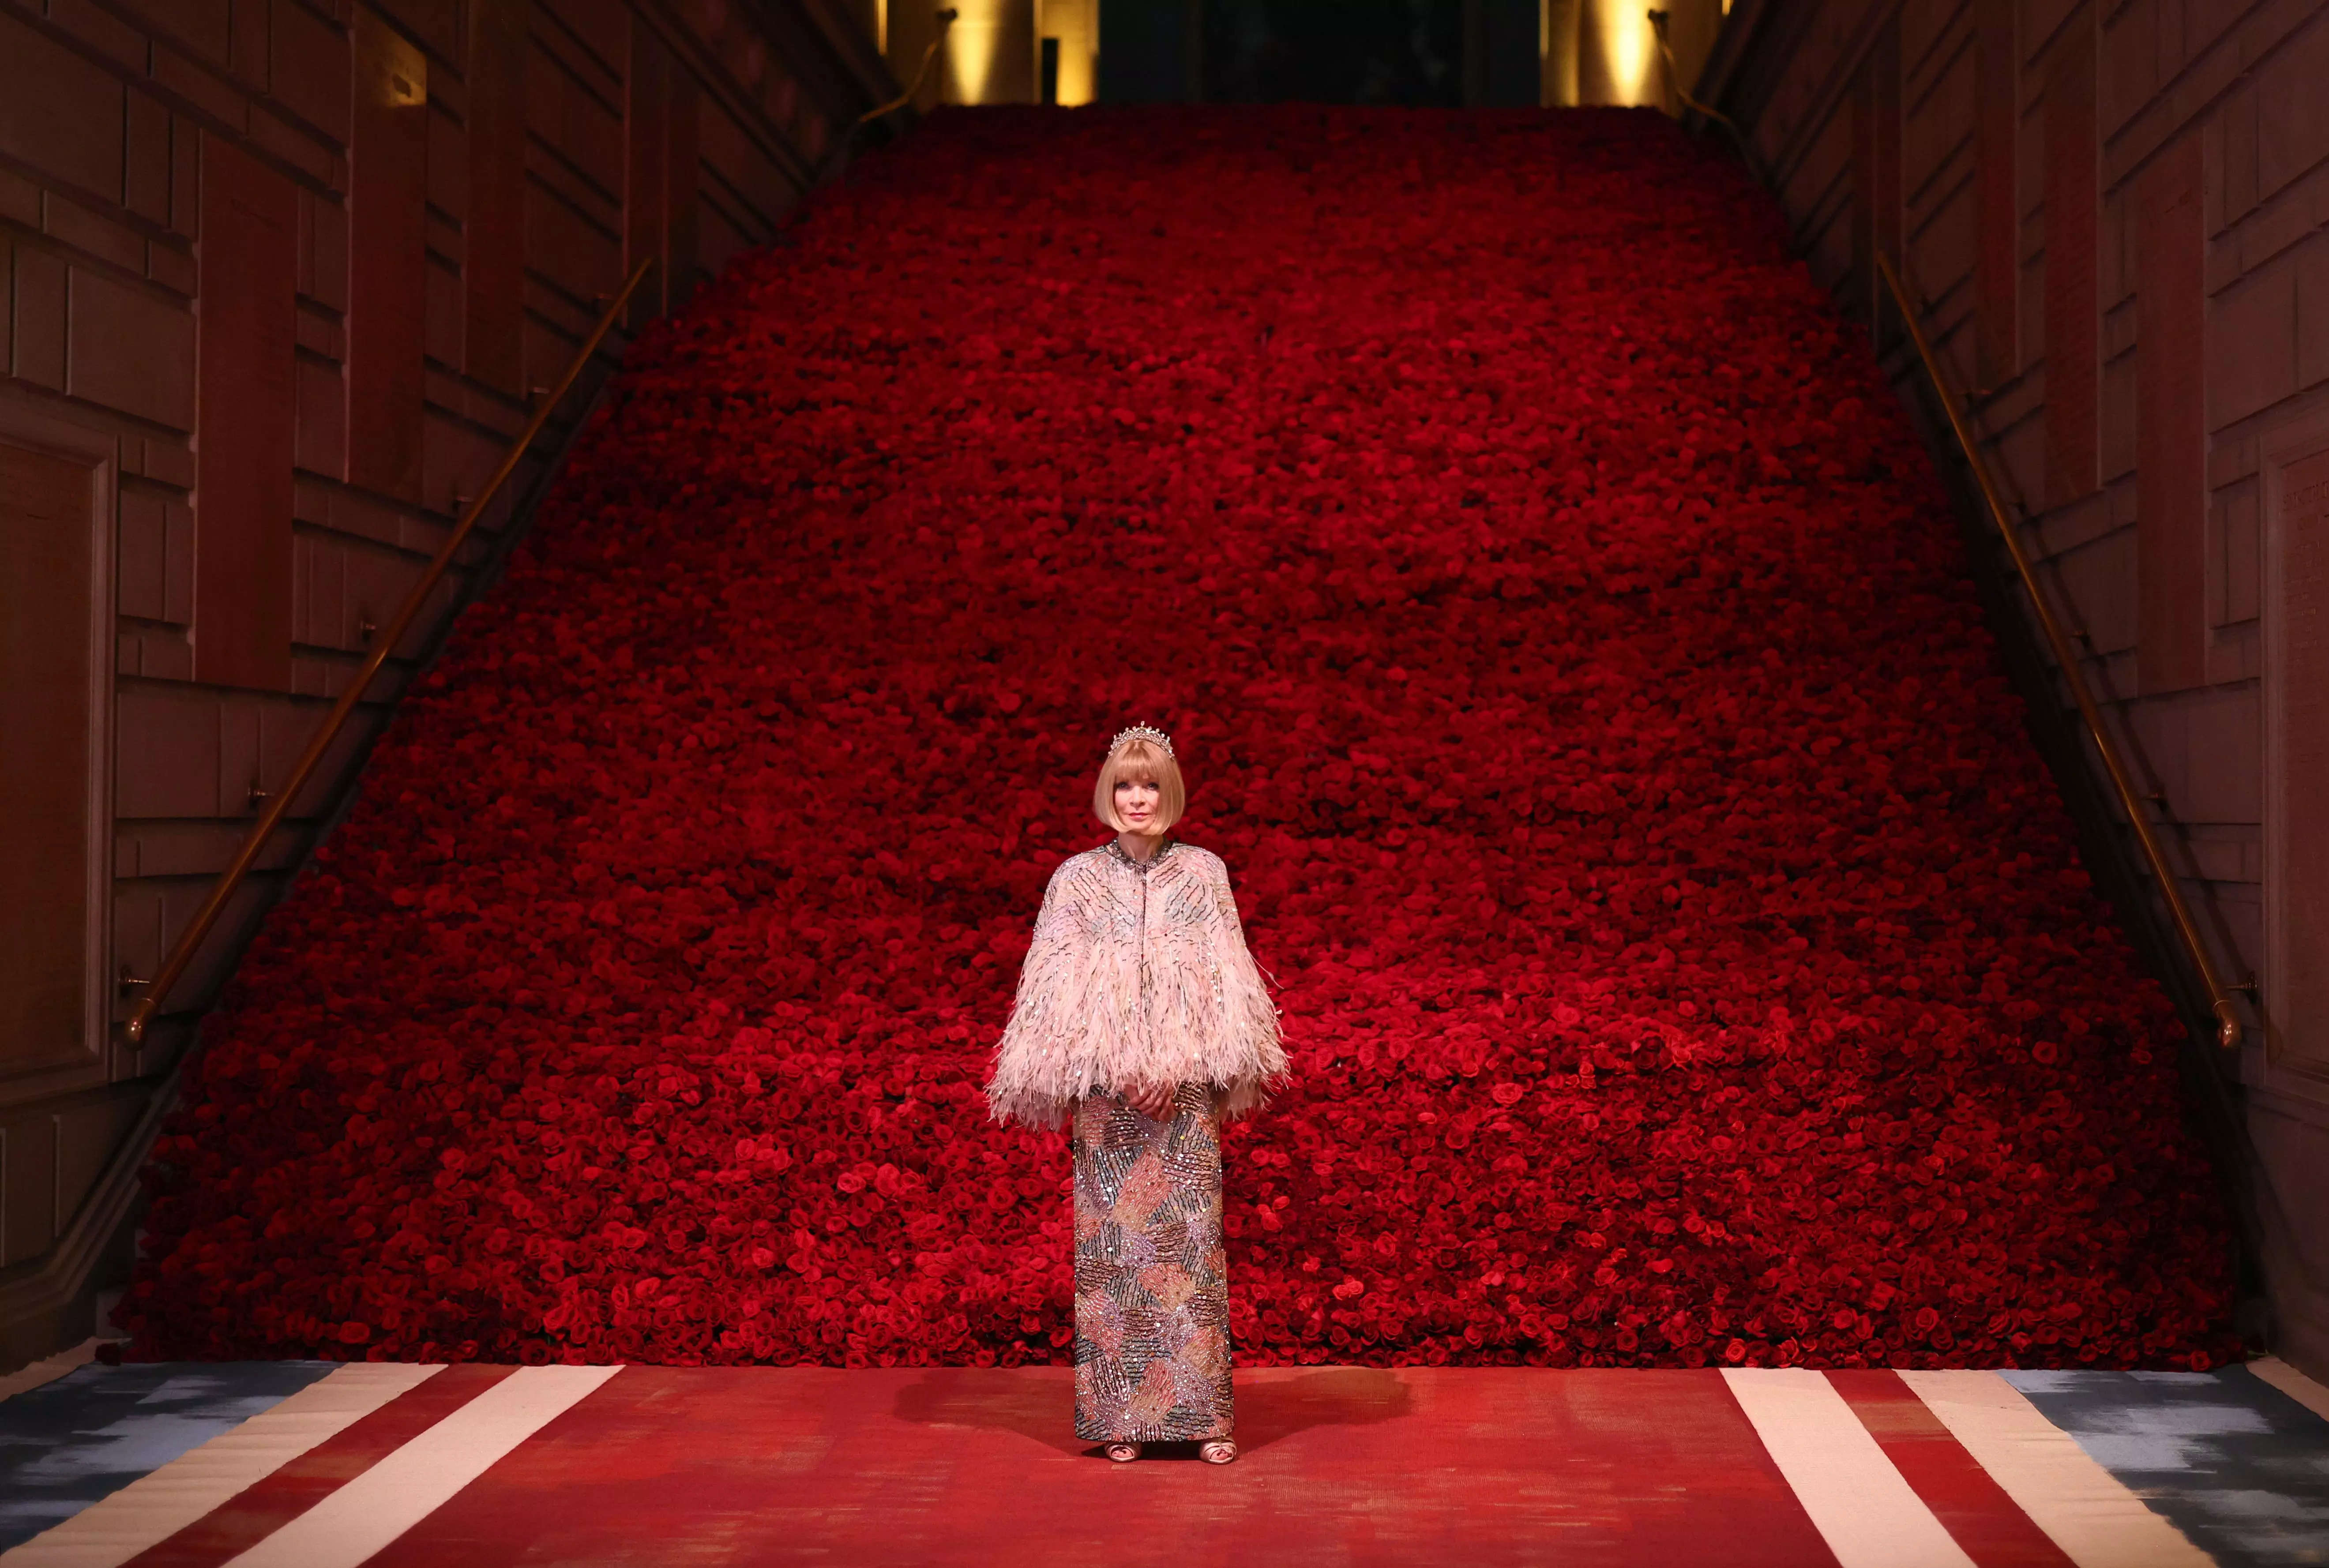 Vogue Editor-in-Chief Anna Wintour attends the 2022 Met Gala